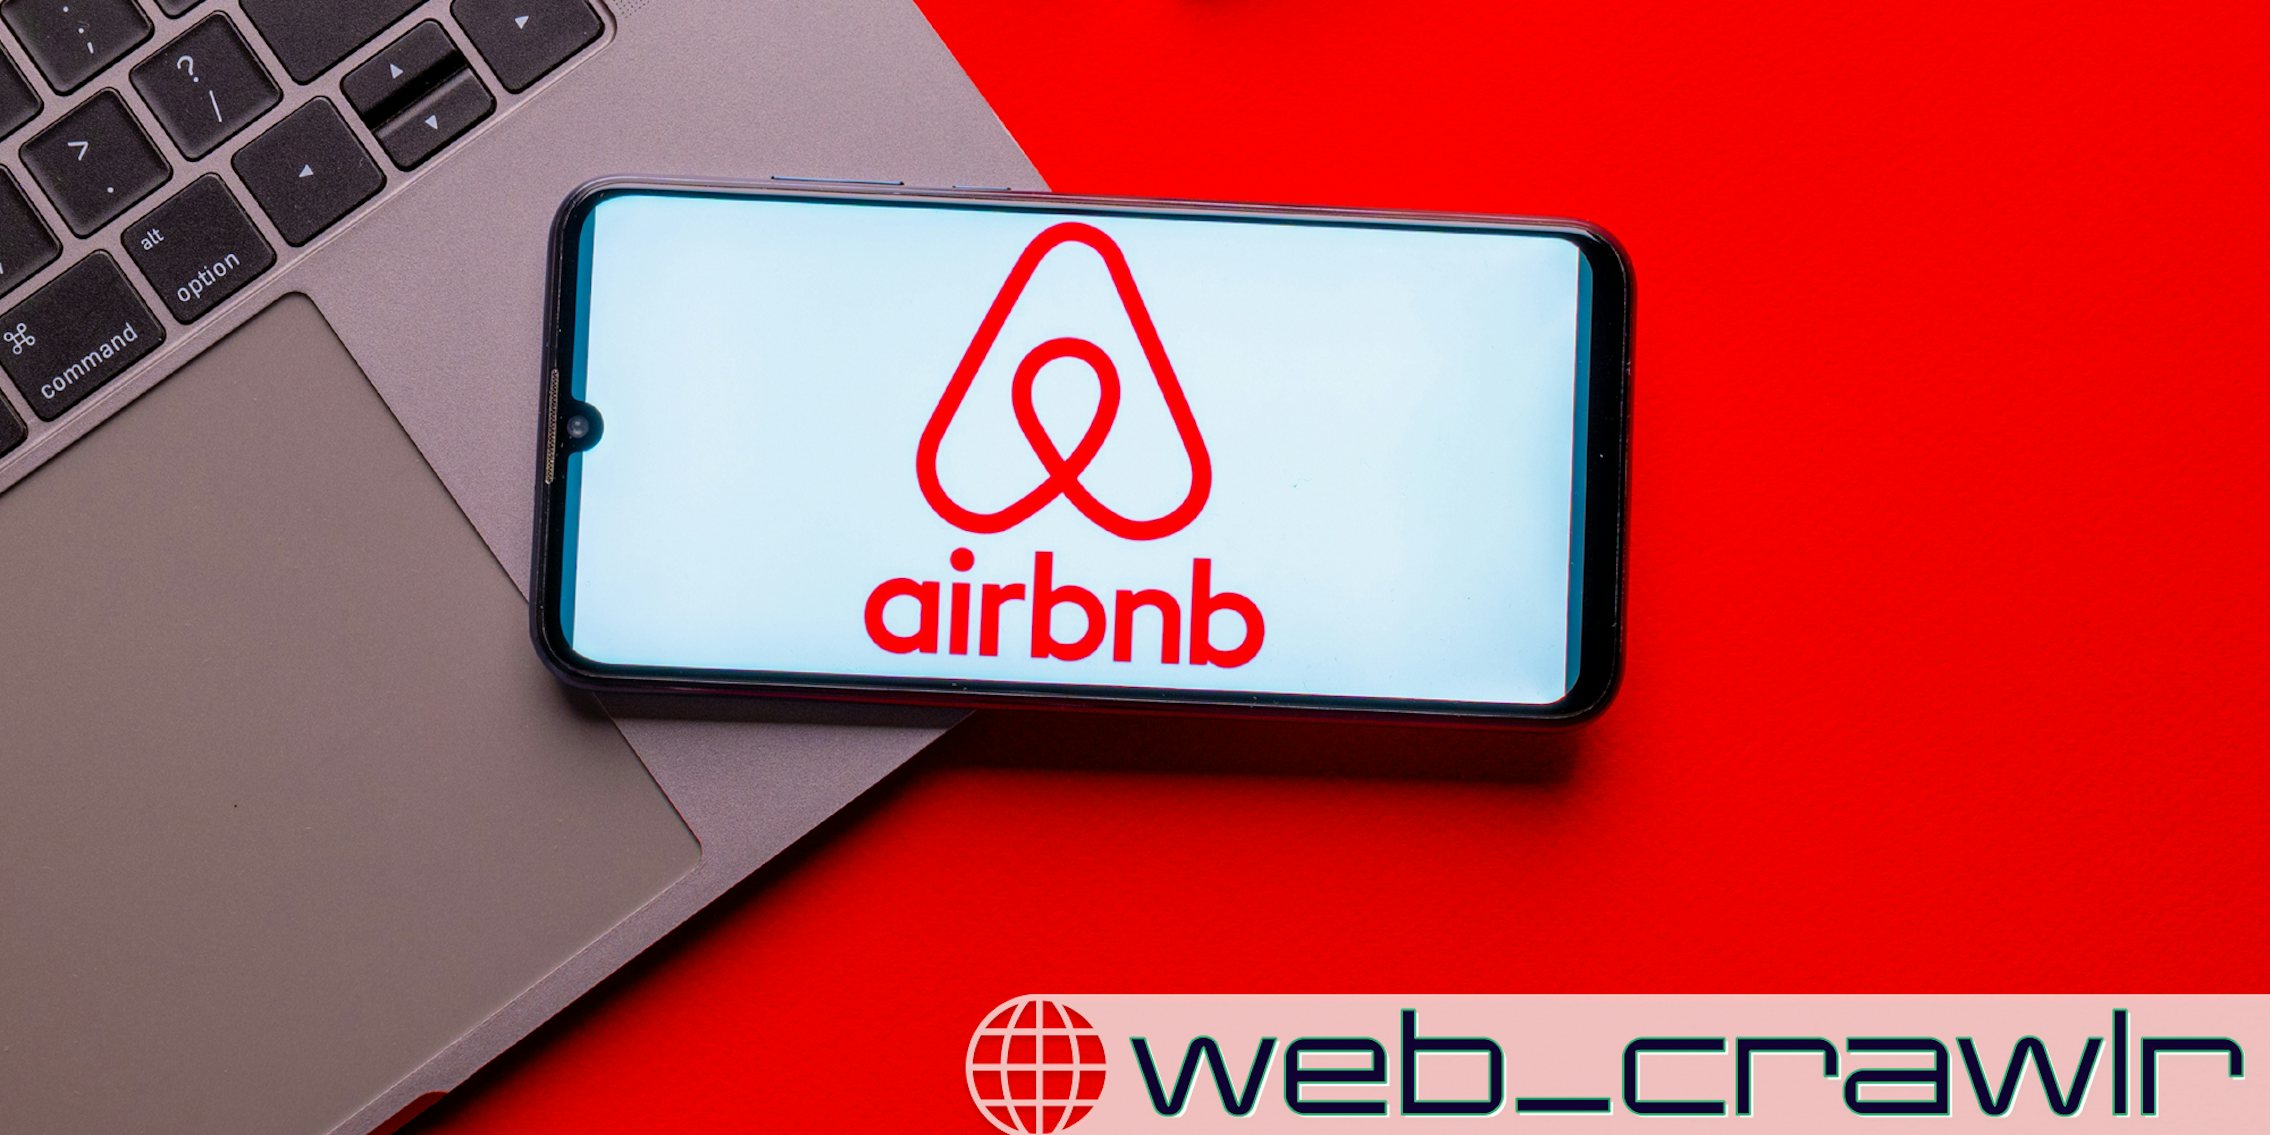 A phone with the Airbnb logo on it resting on a laptop. The Daily Dot newsletter web_crawlr logo is in the bottom right corner.